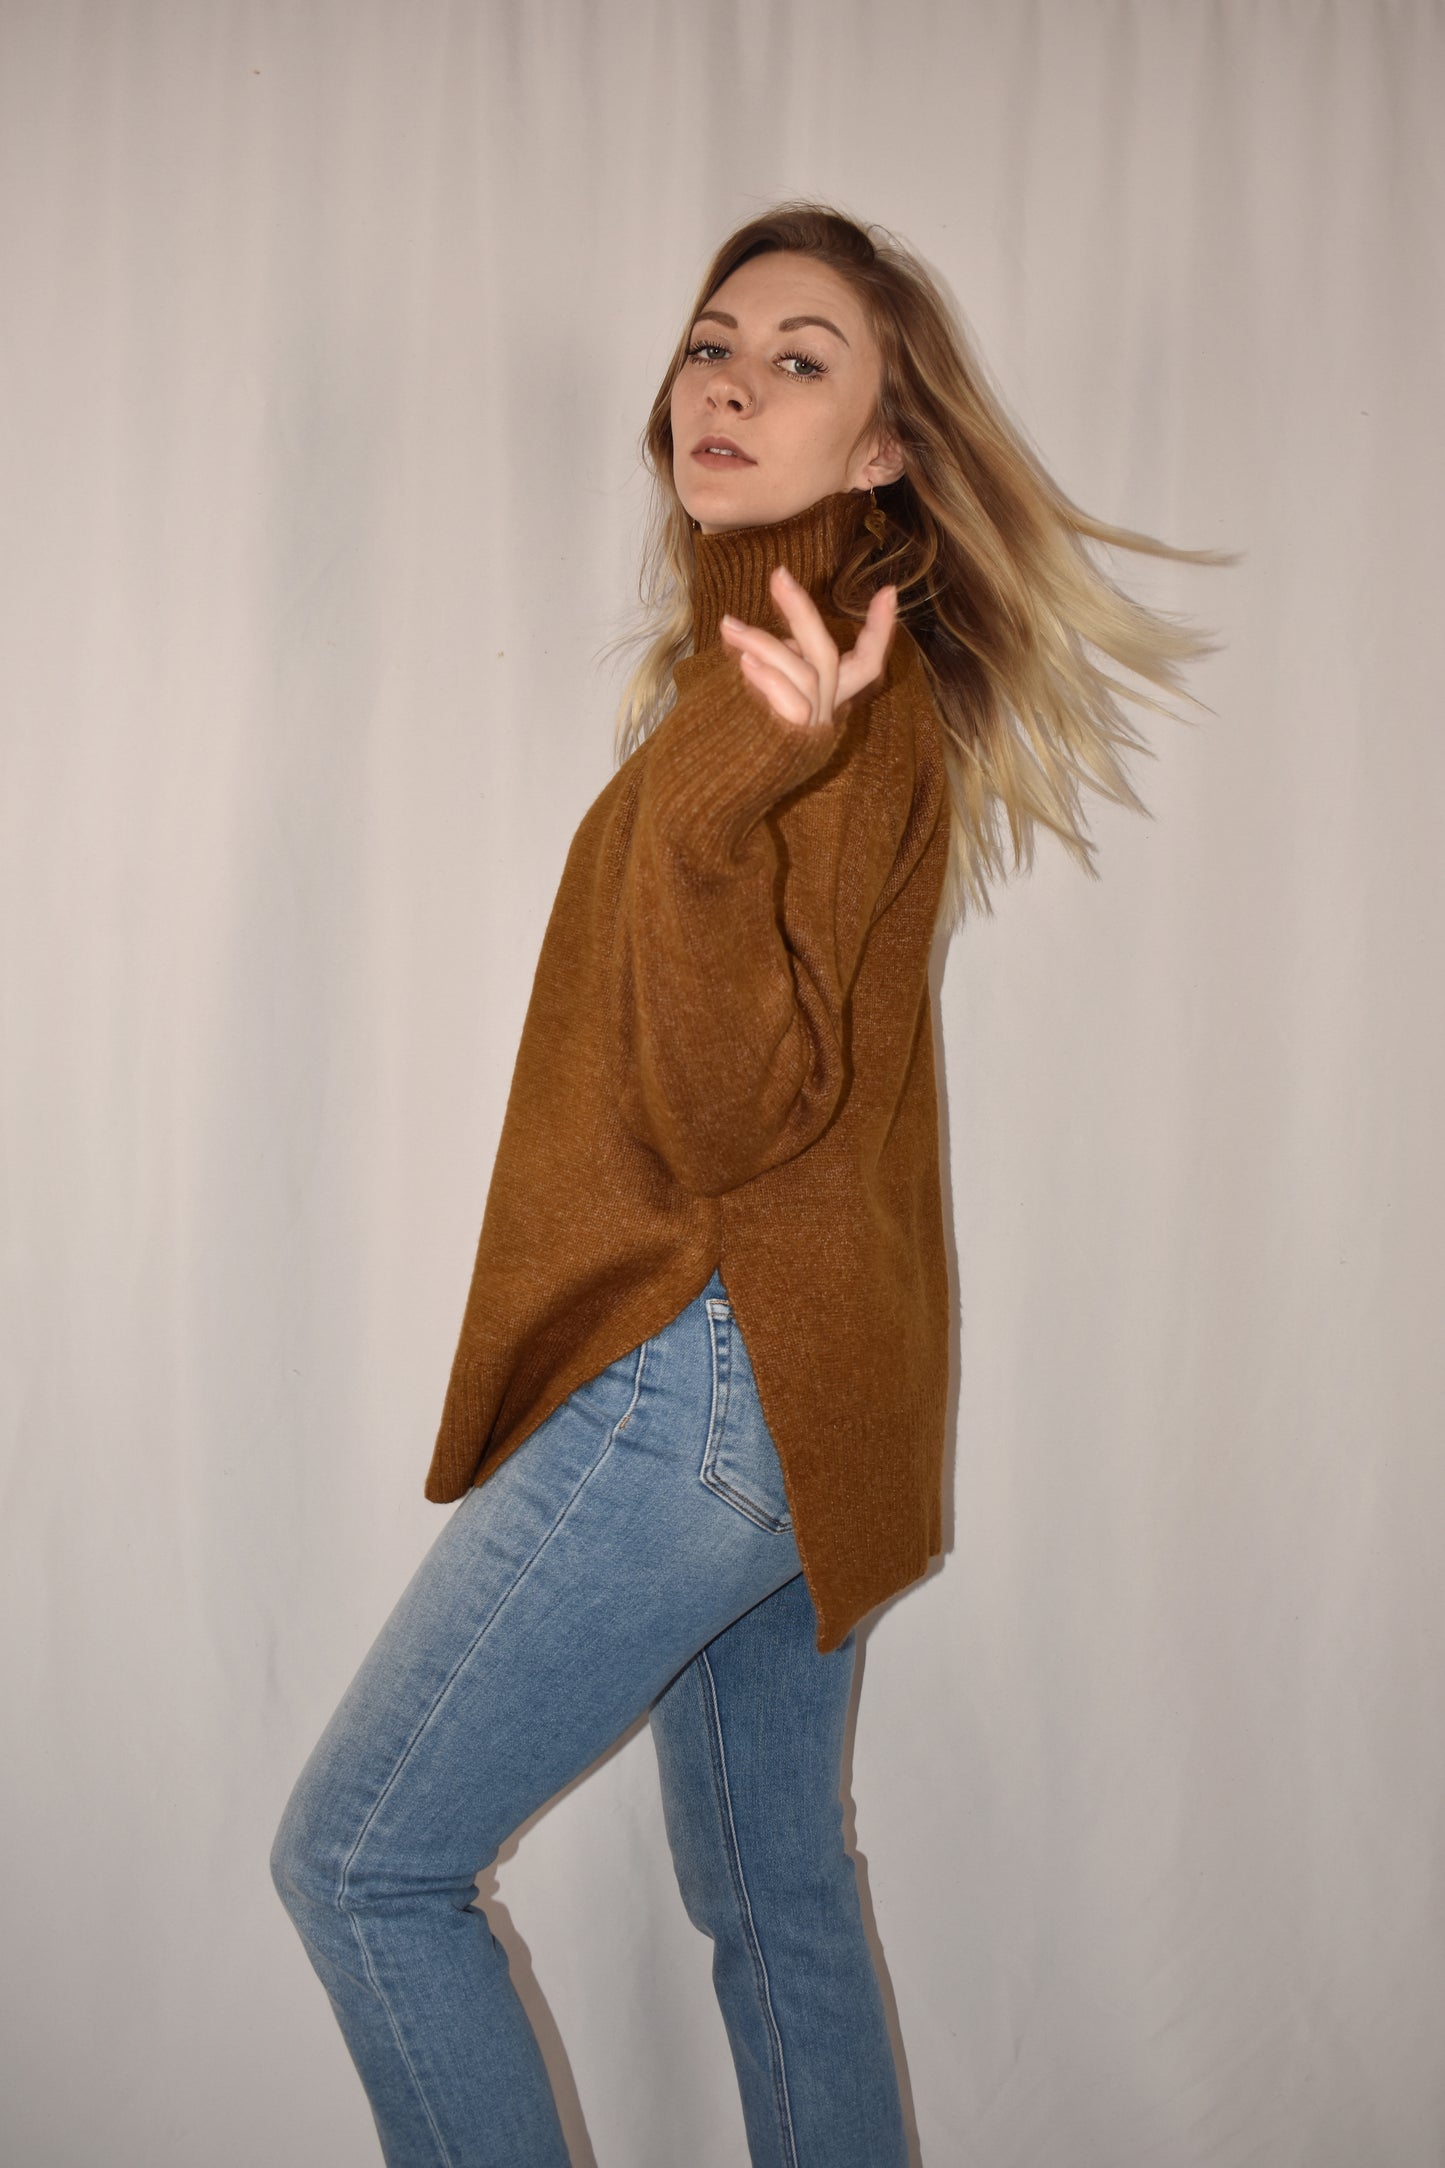 boxy high neck sweater with turtleneck that doesn't fold over. full length with side slits.